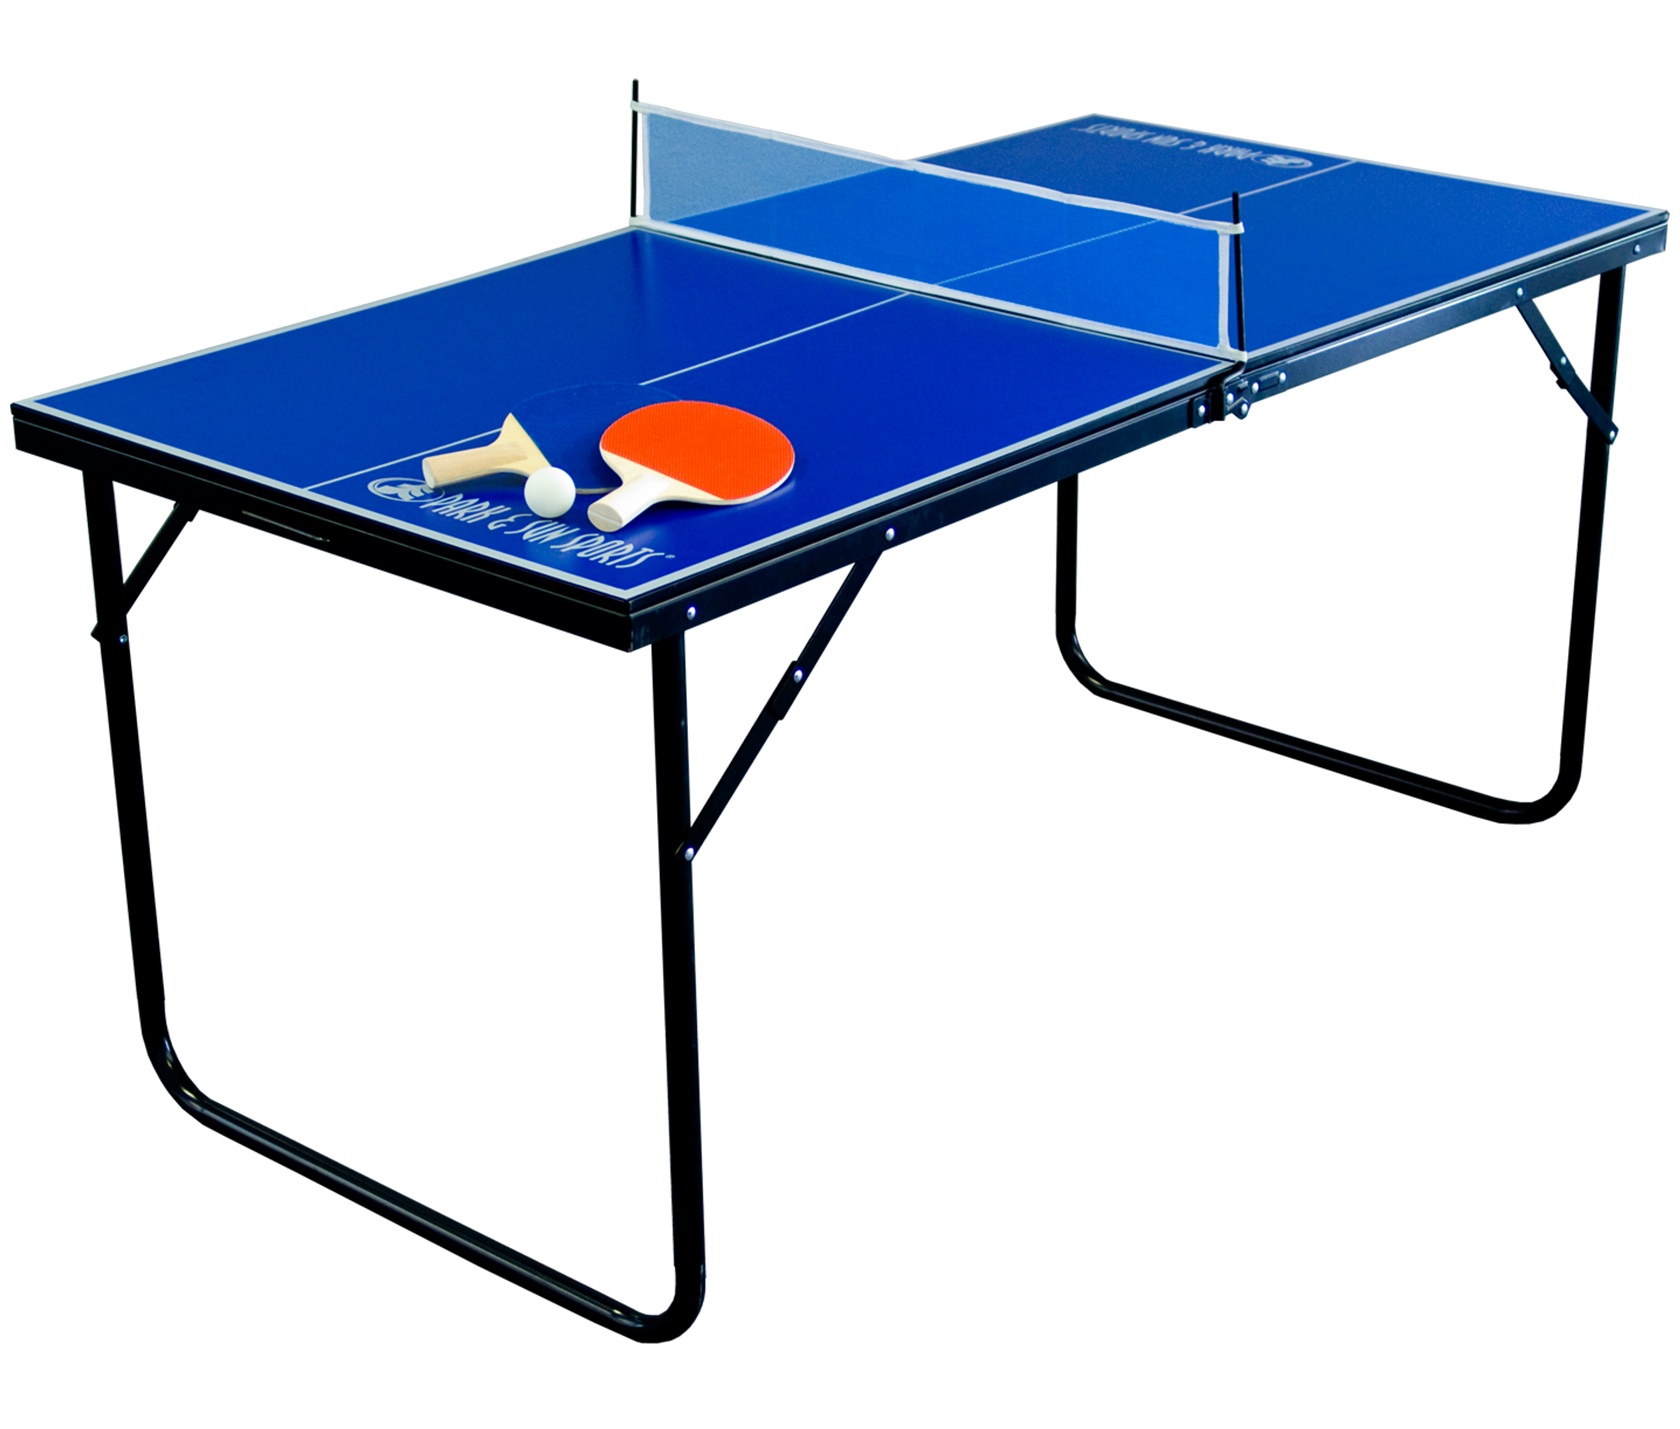 Park and Sports Blue Mini Table Tennis Table